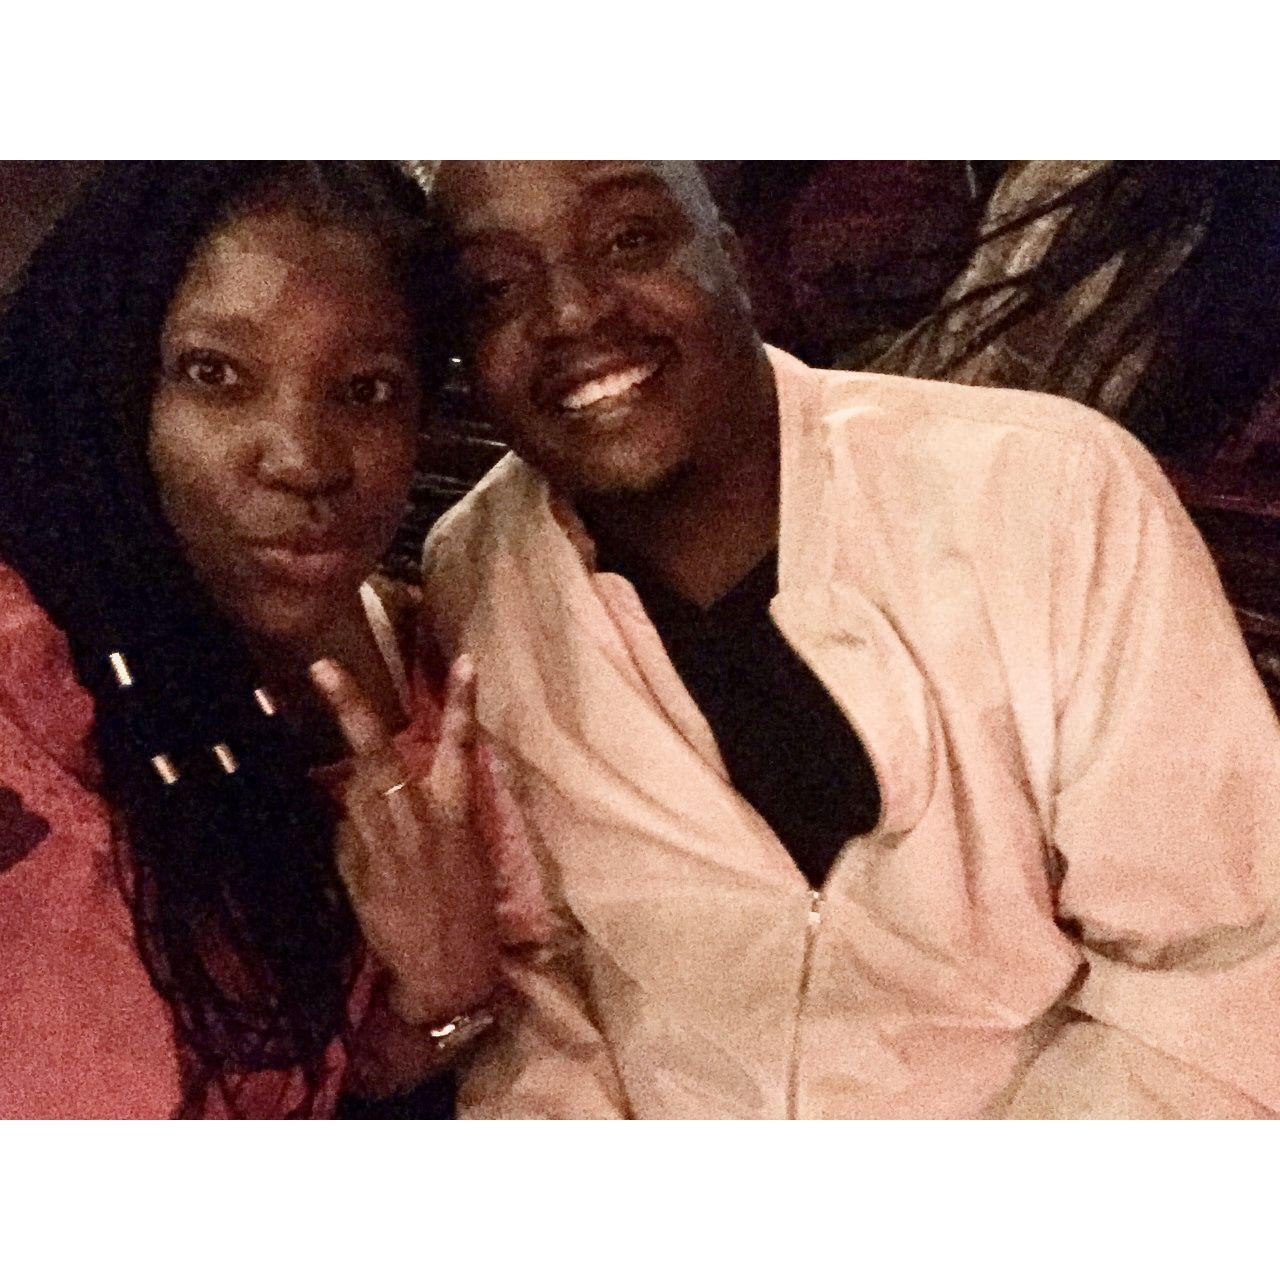 08 April 2018 - Our very first photograph together (which is why it is so grainy). Claremont, Cape Town.